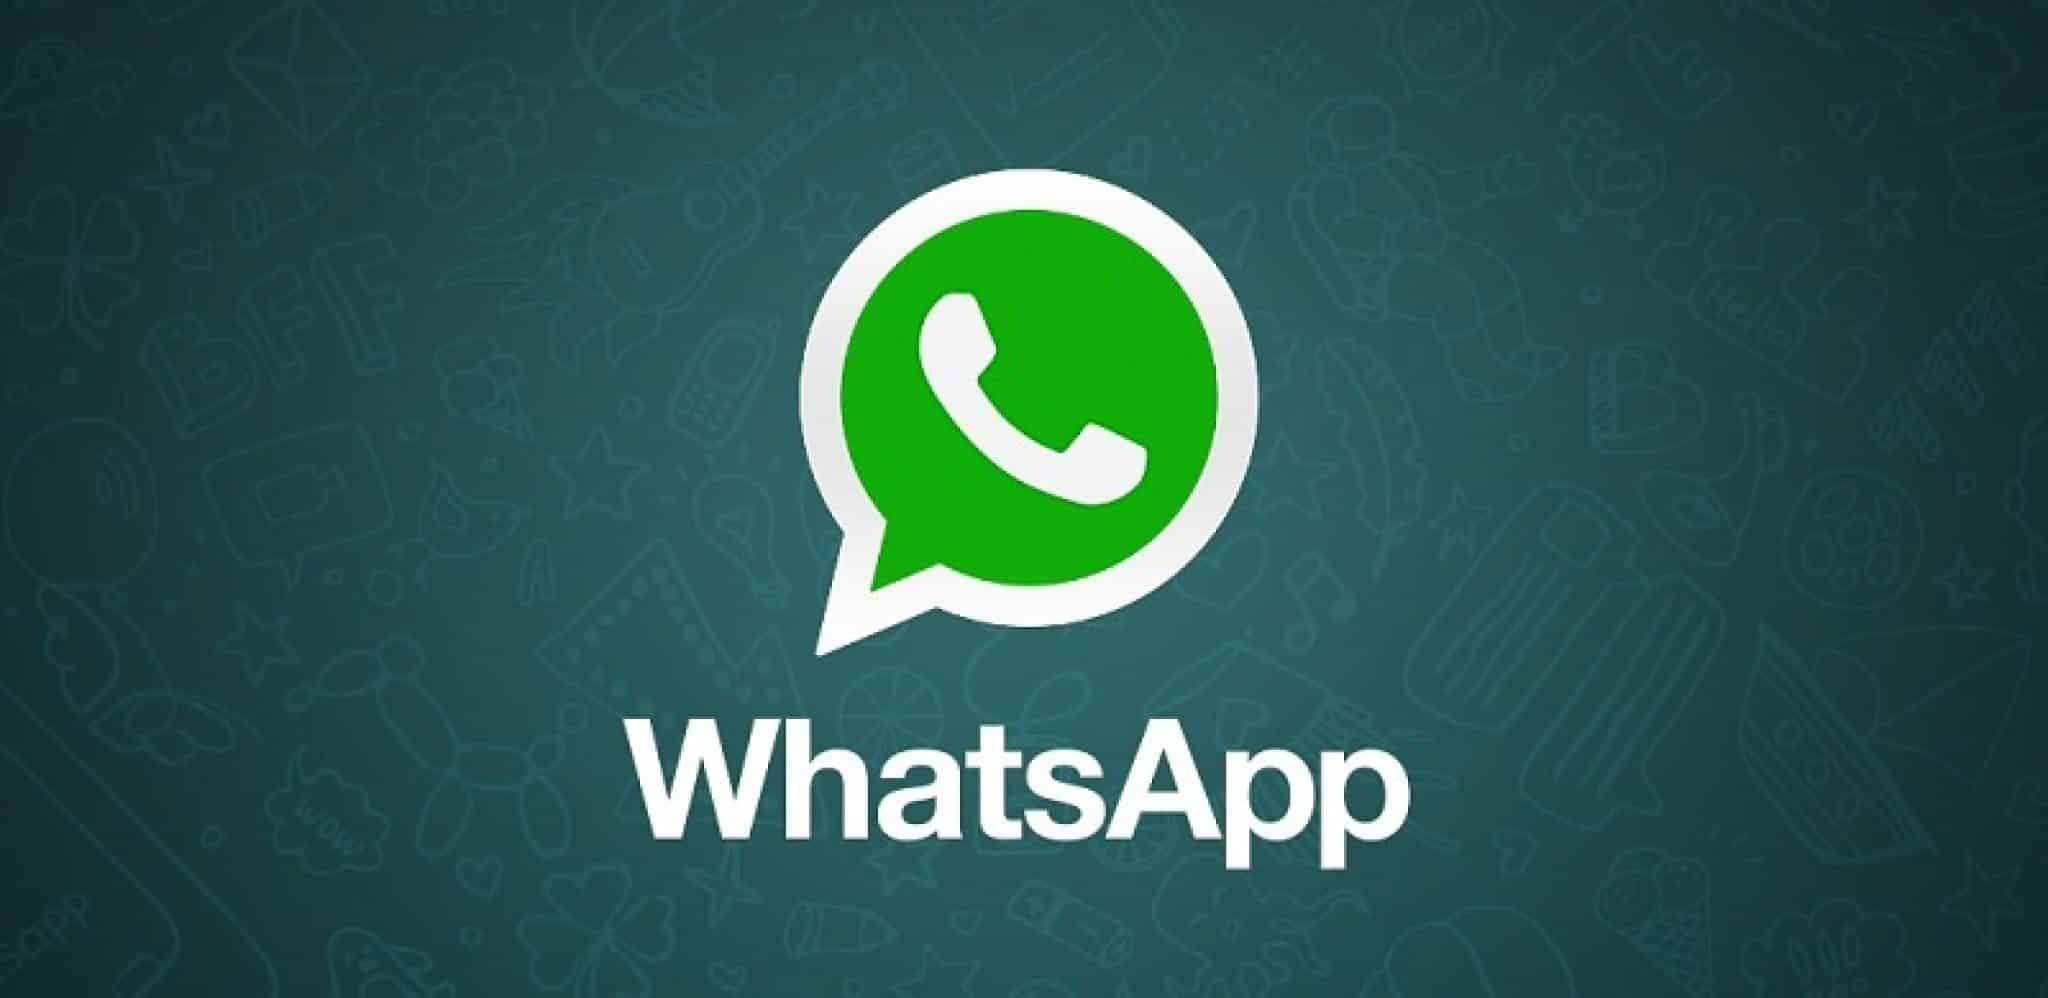 whatsapp download for pc windows 7